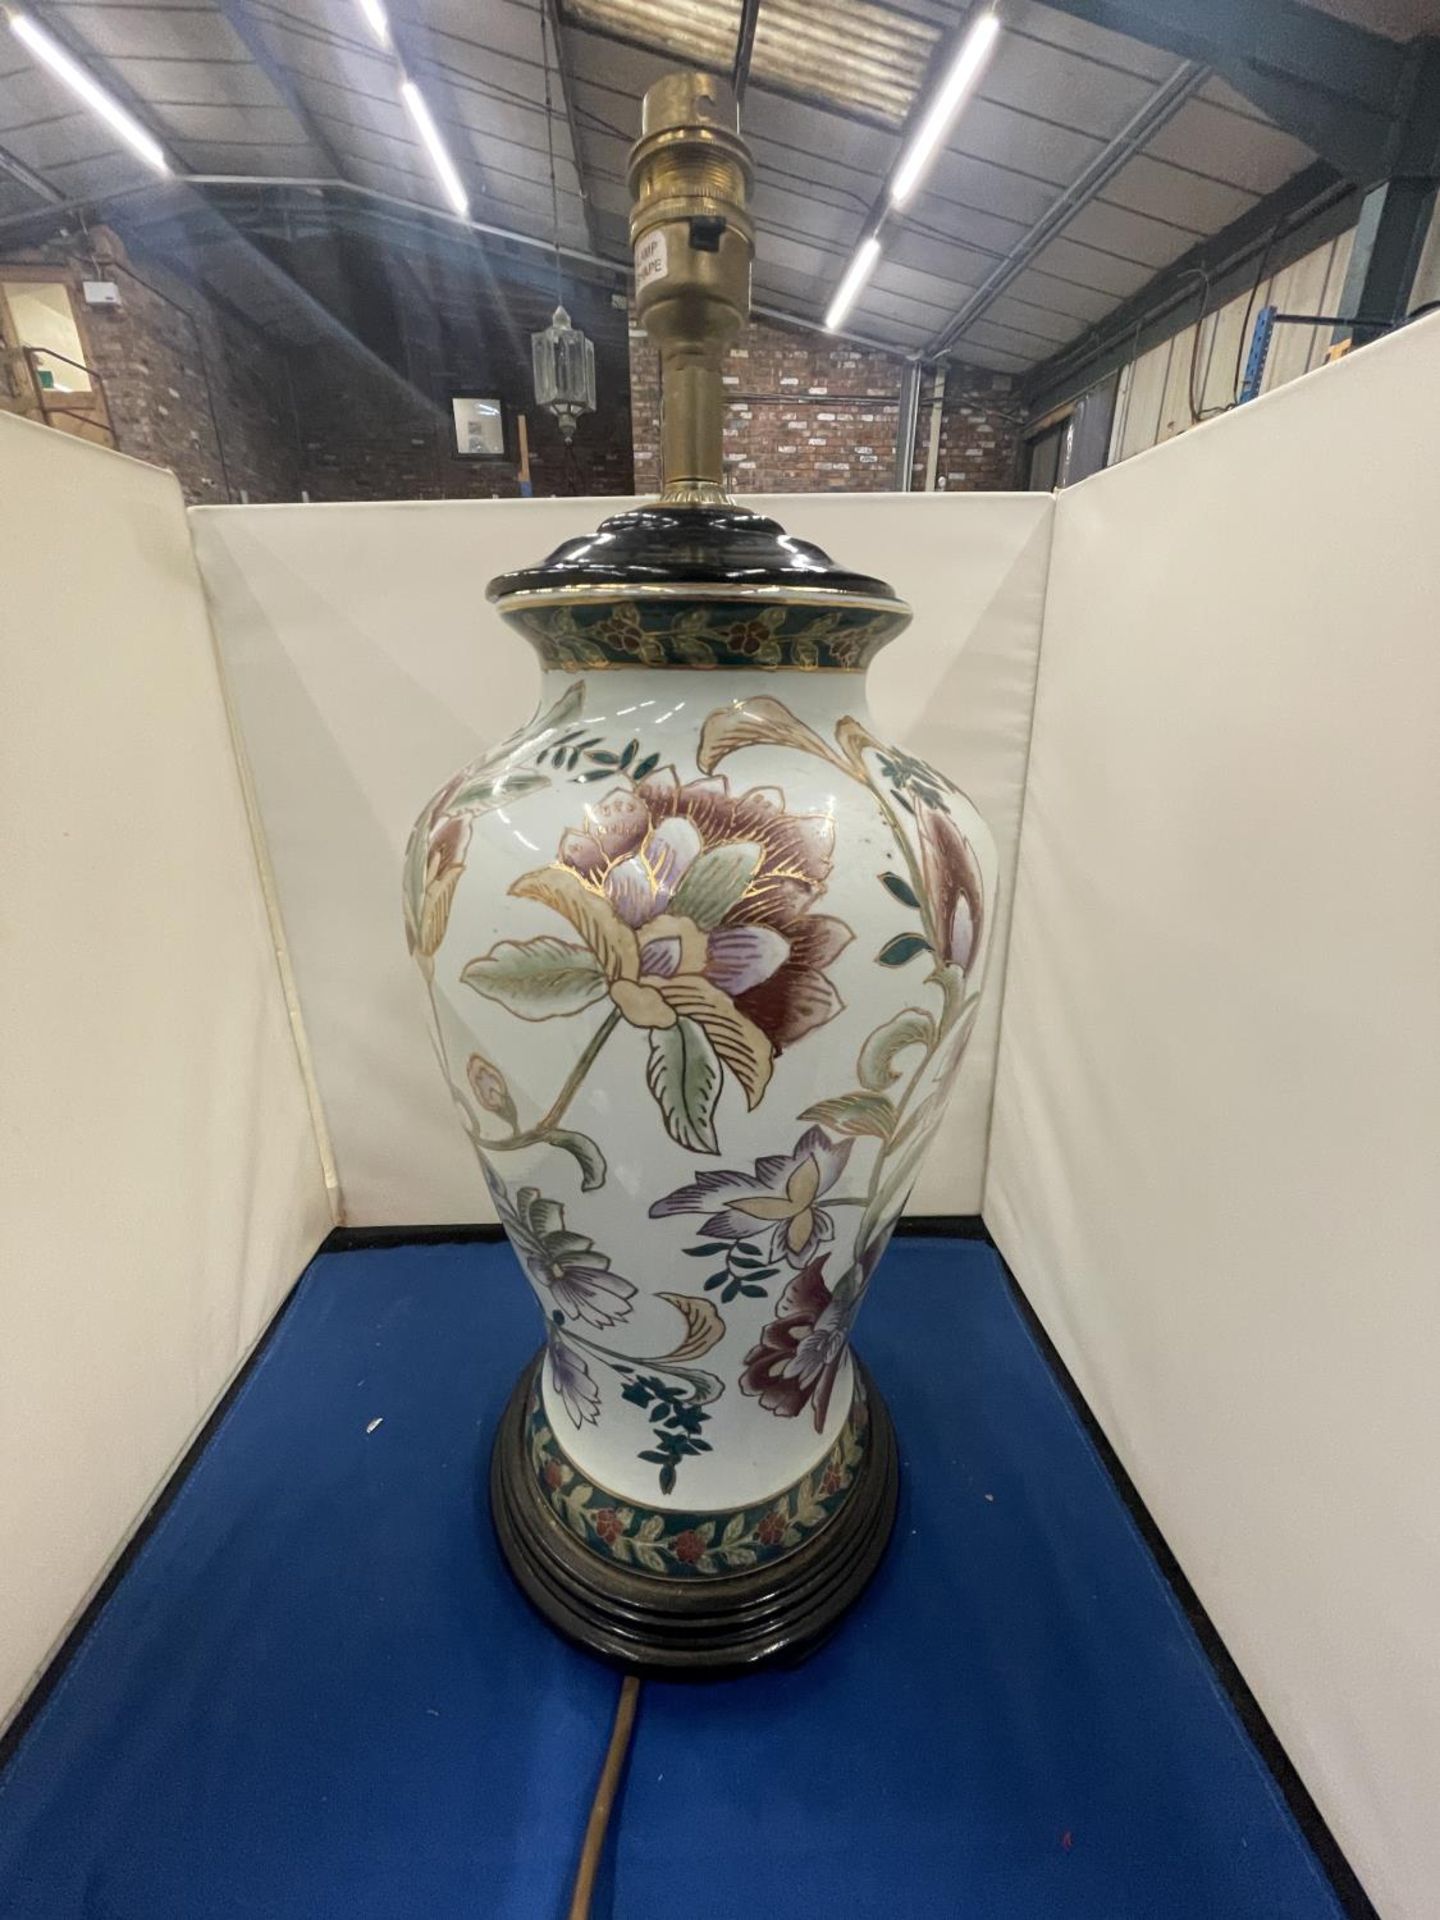 AN ORIENTAL STYLE CERAMIC TABLE LAMP ON A WOODEN BASE